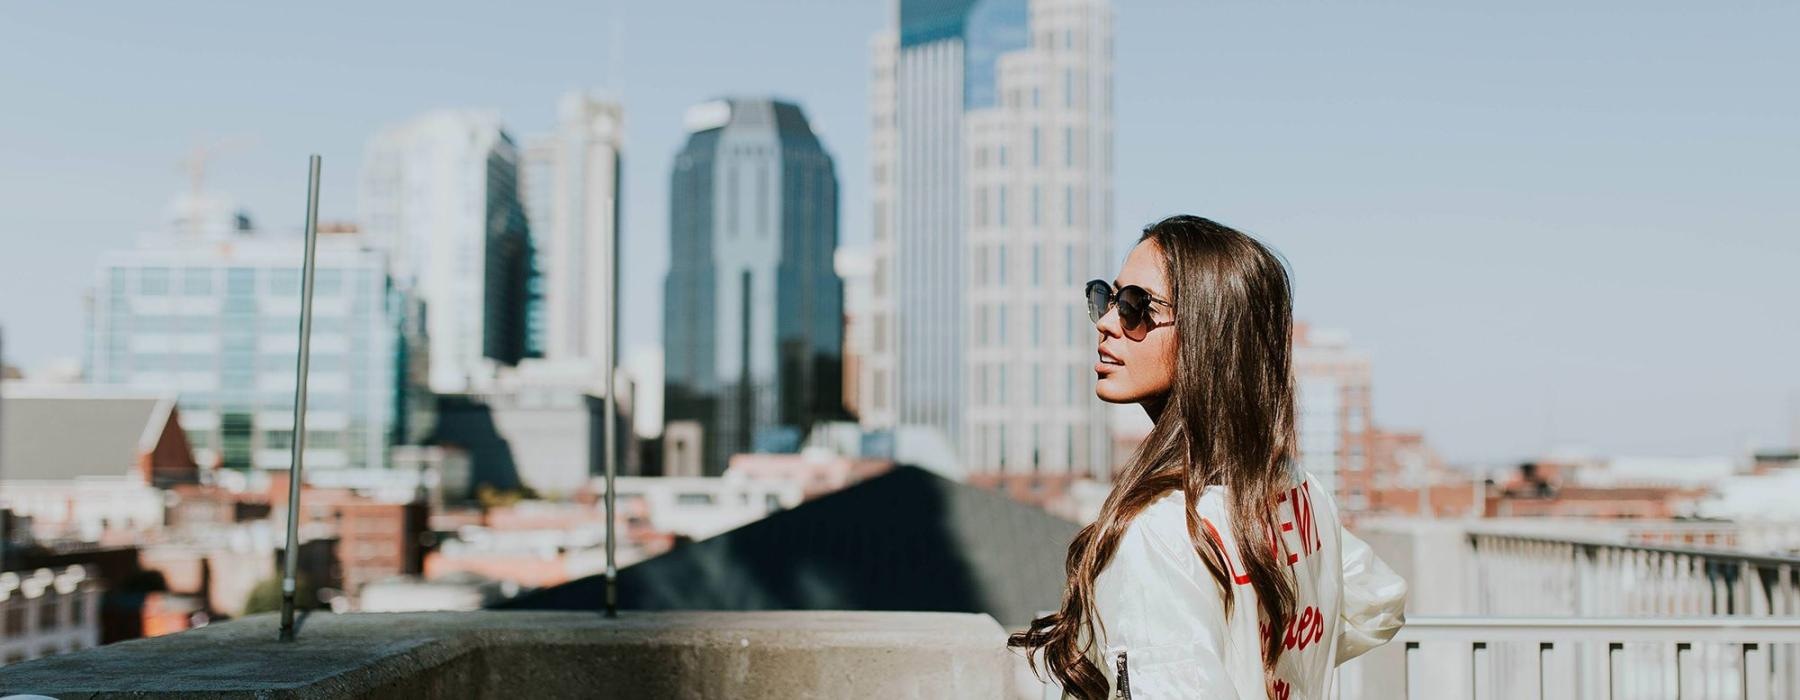 woman with sunglasses stands on a rooftop overlooking the city